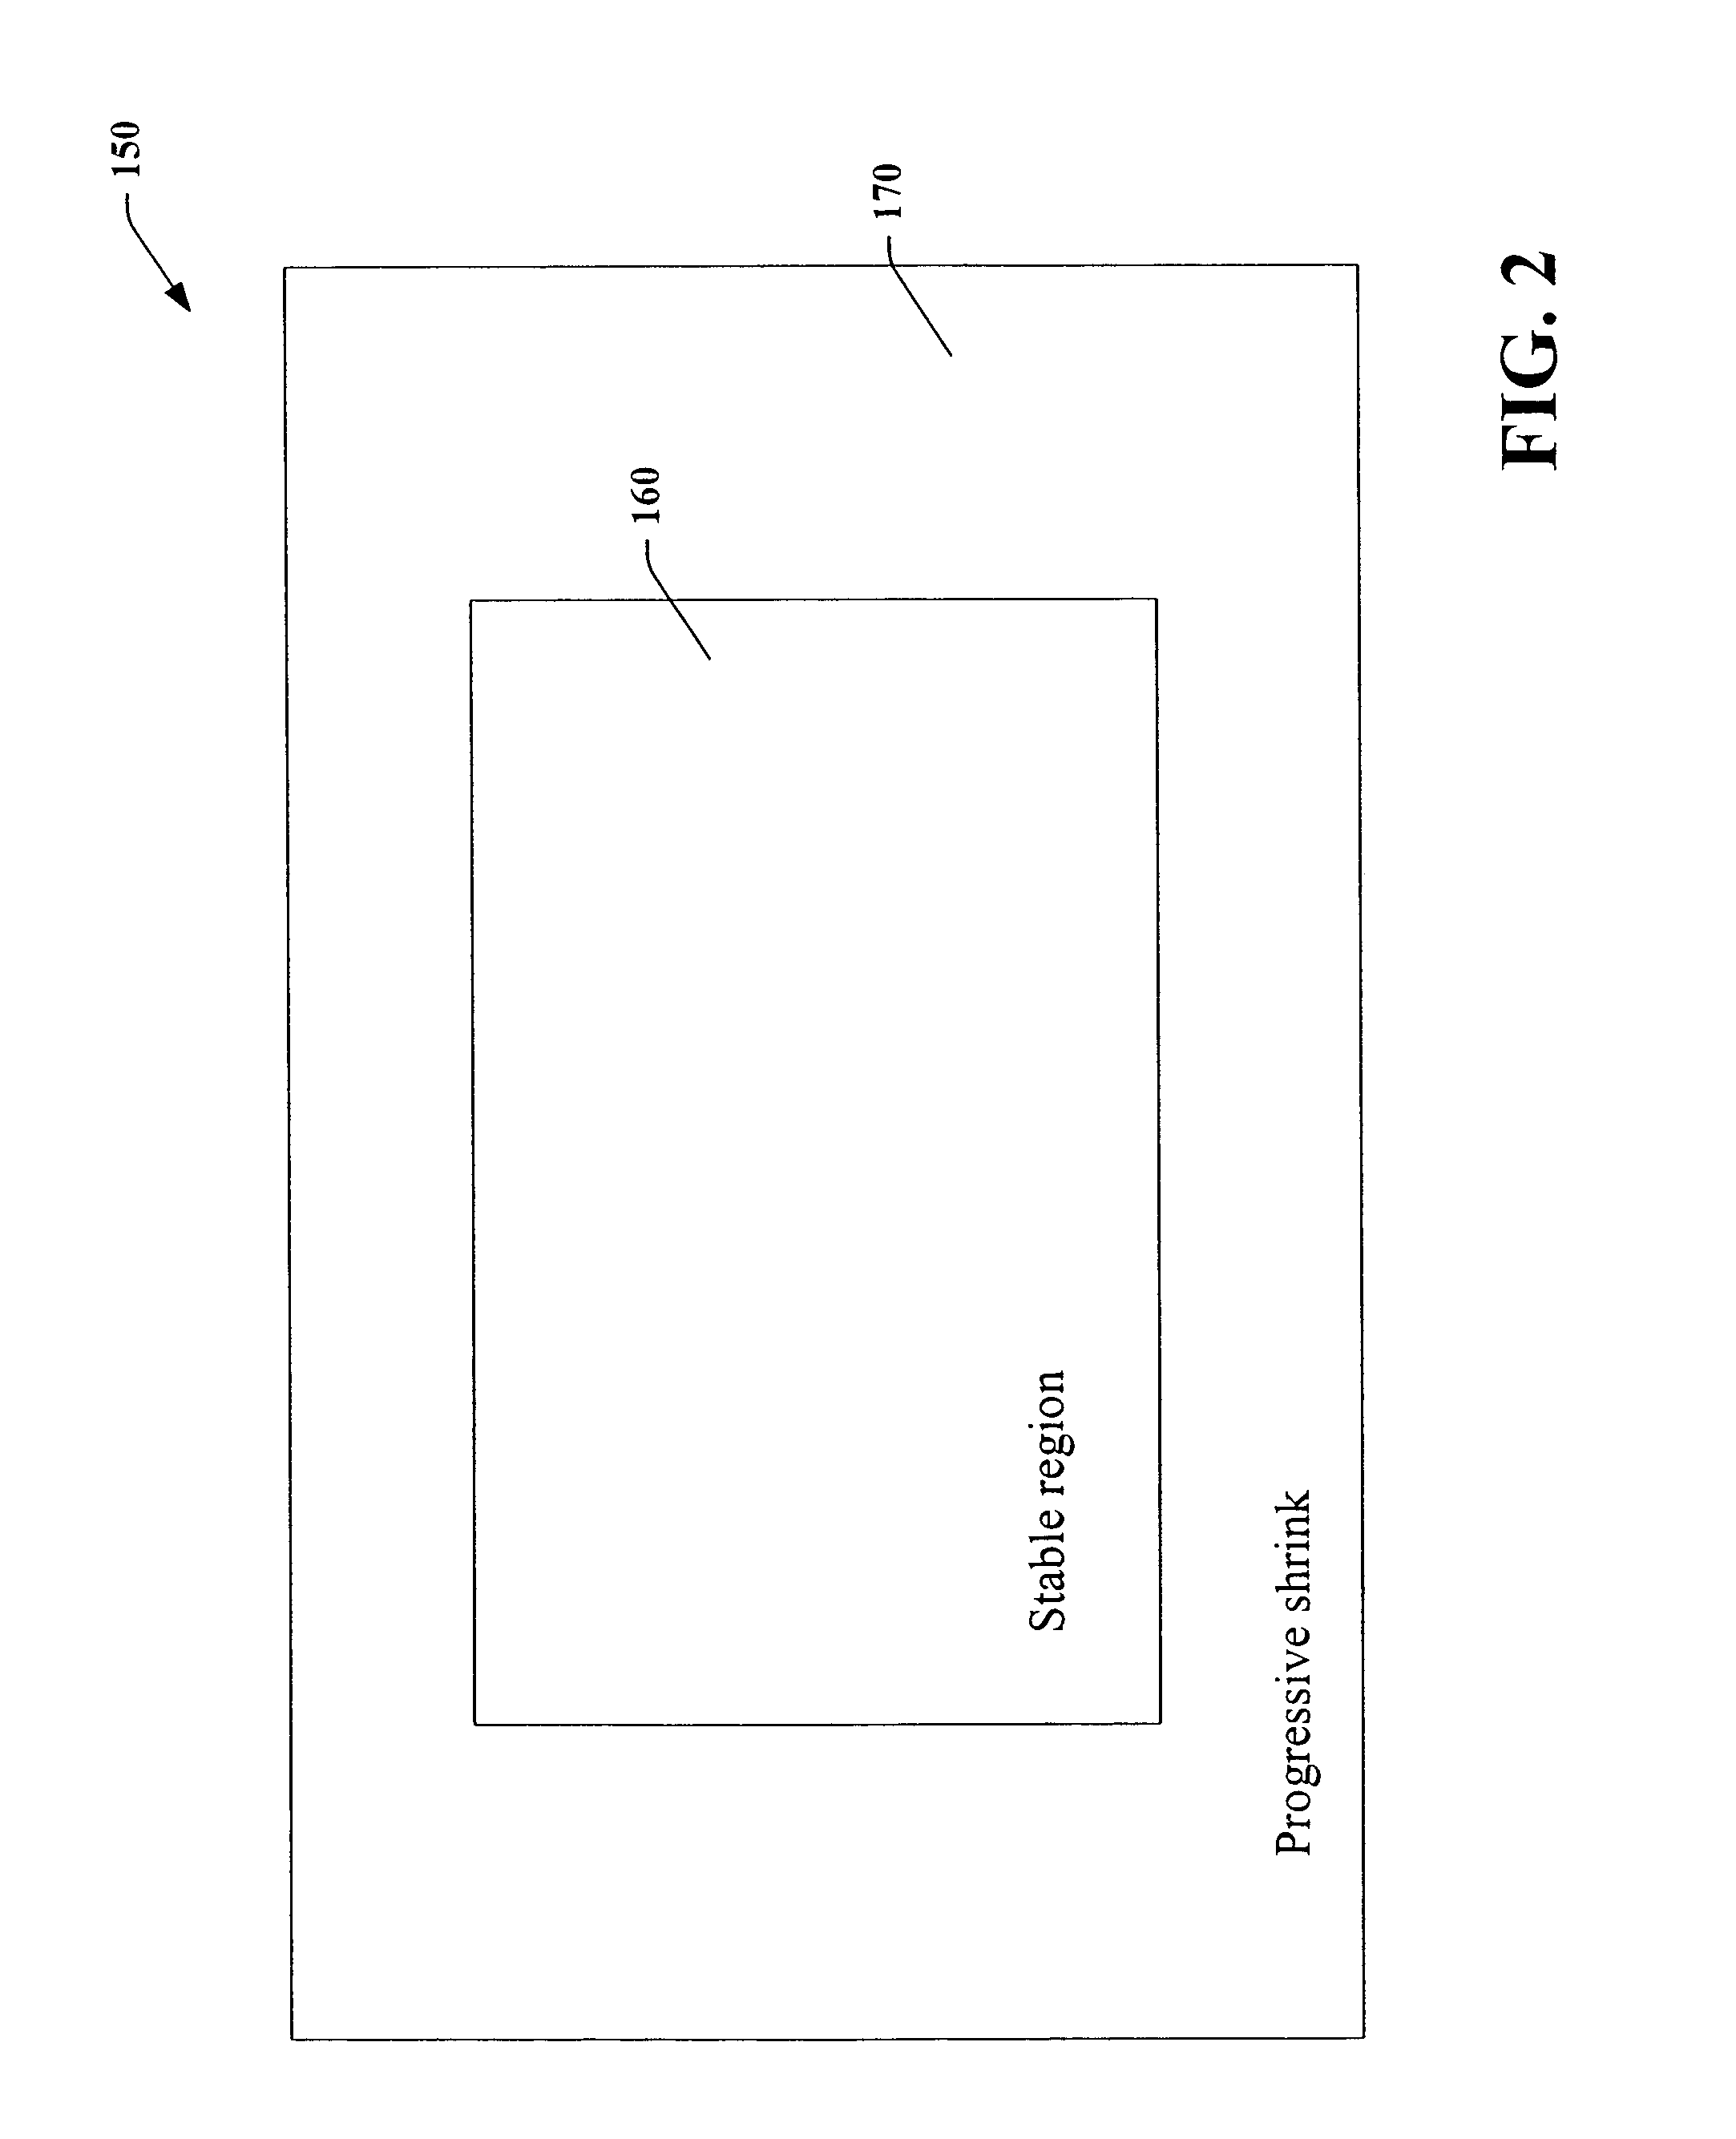 System and method that facilitates computer desktop use via scaling of displayed objects with shifts to the periphery